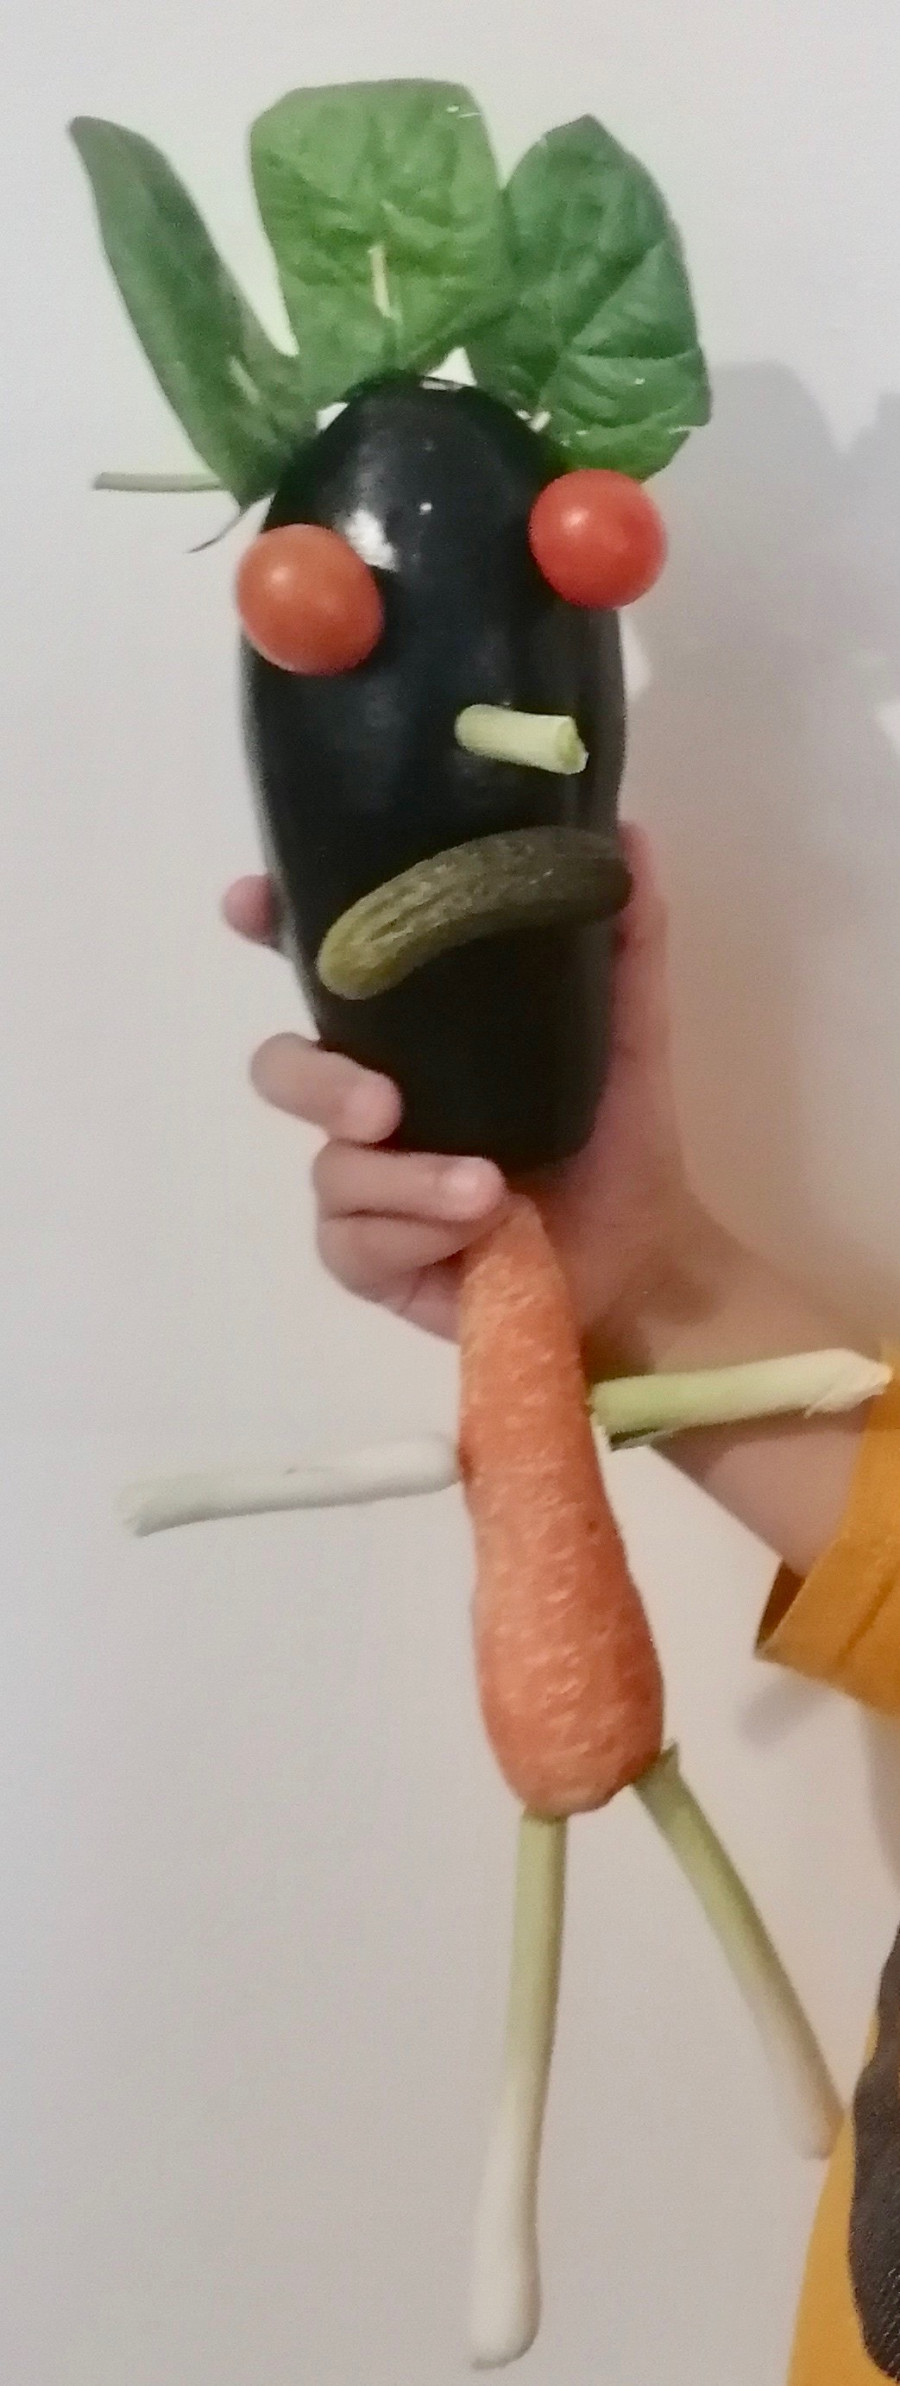 'Quirky Veggies Zooga!' by Kyde (7) from Kildare